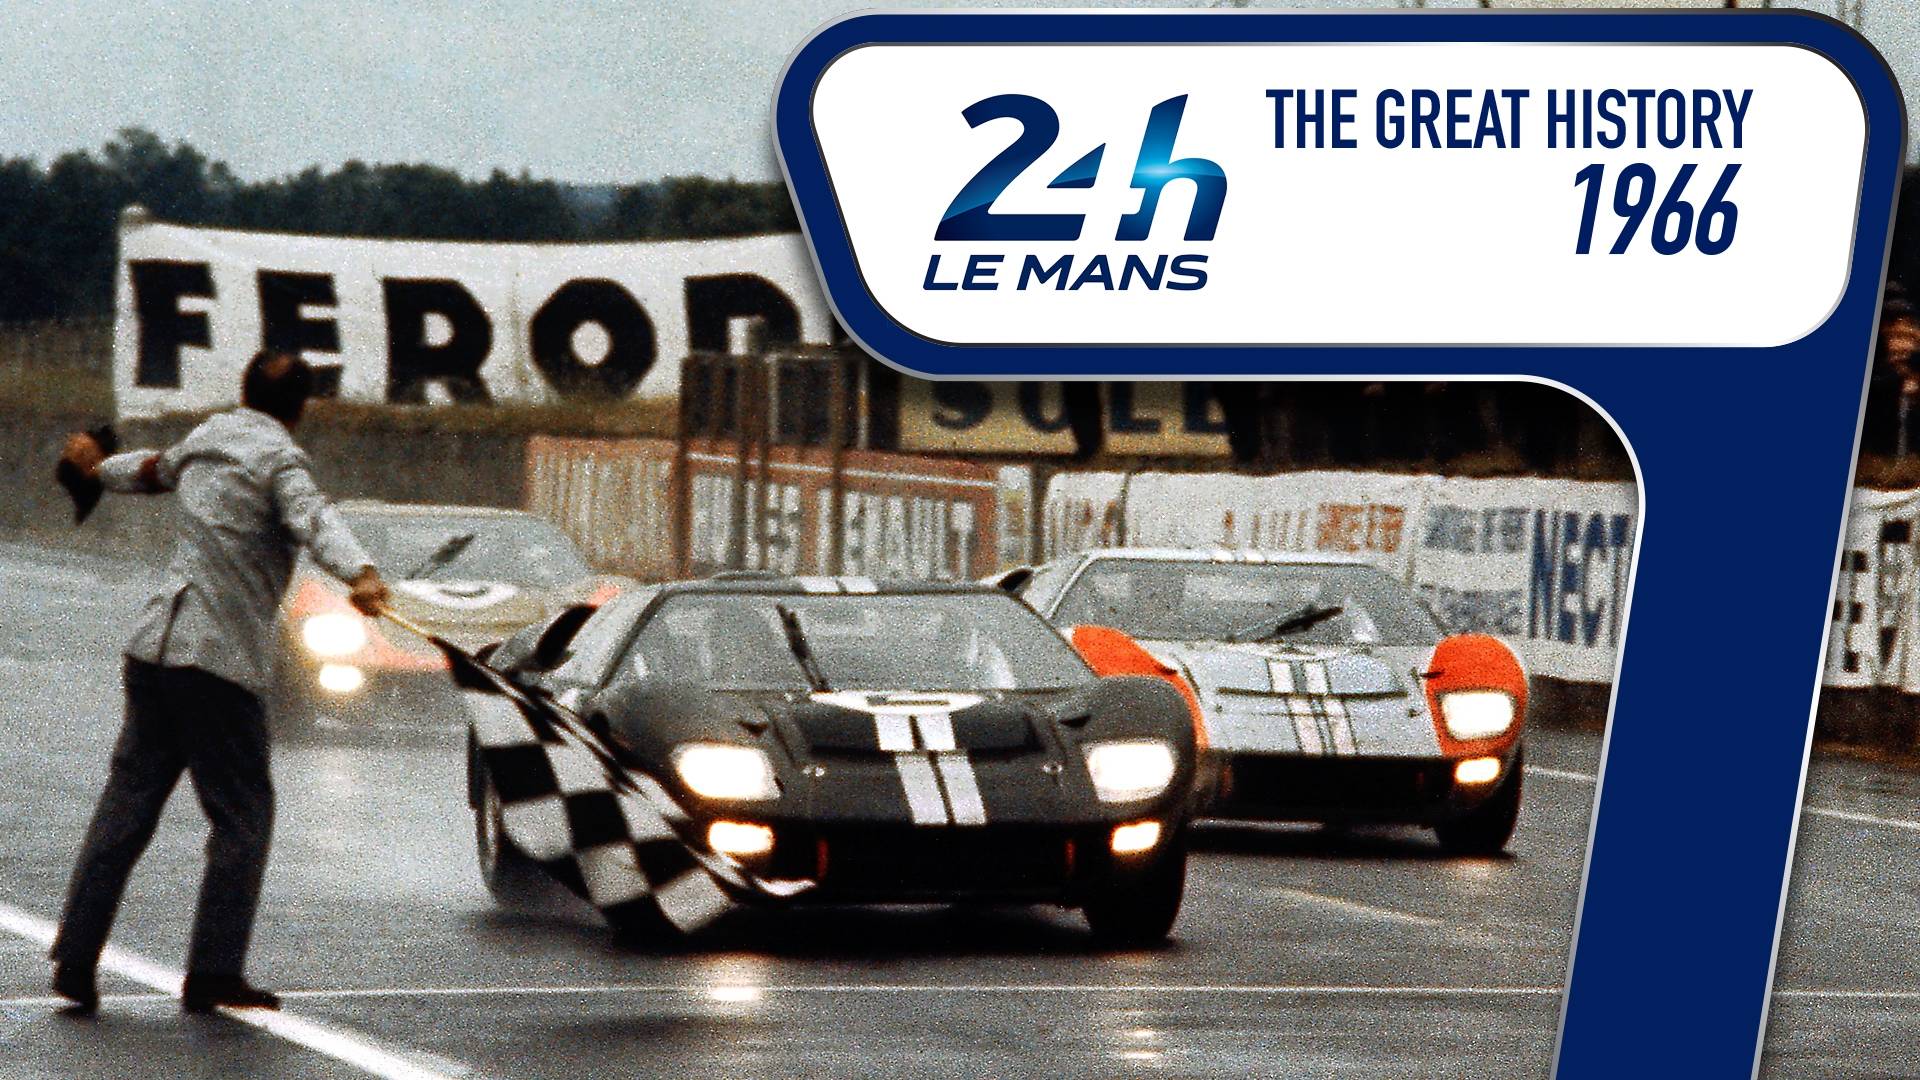 /join/tvSlider/24 Hours of Le Mans: The Great History